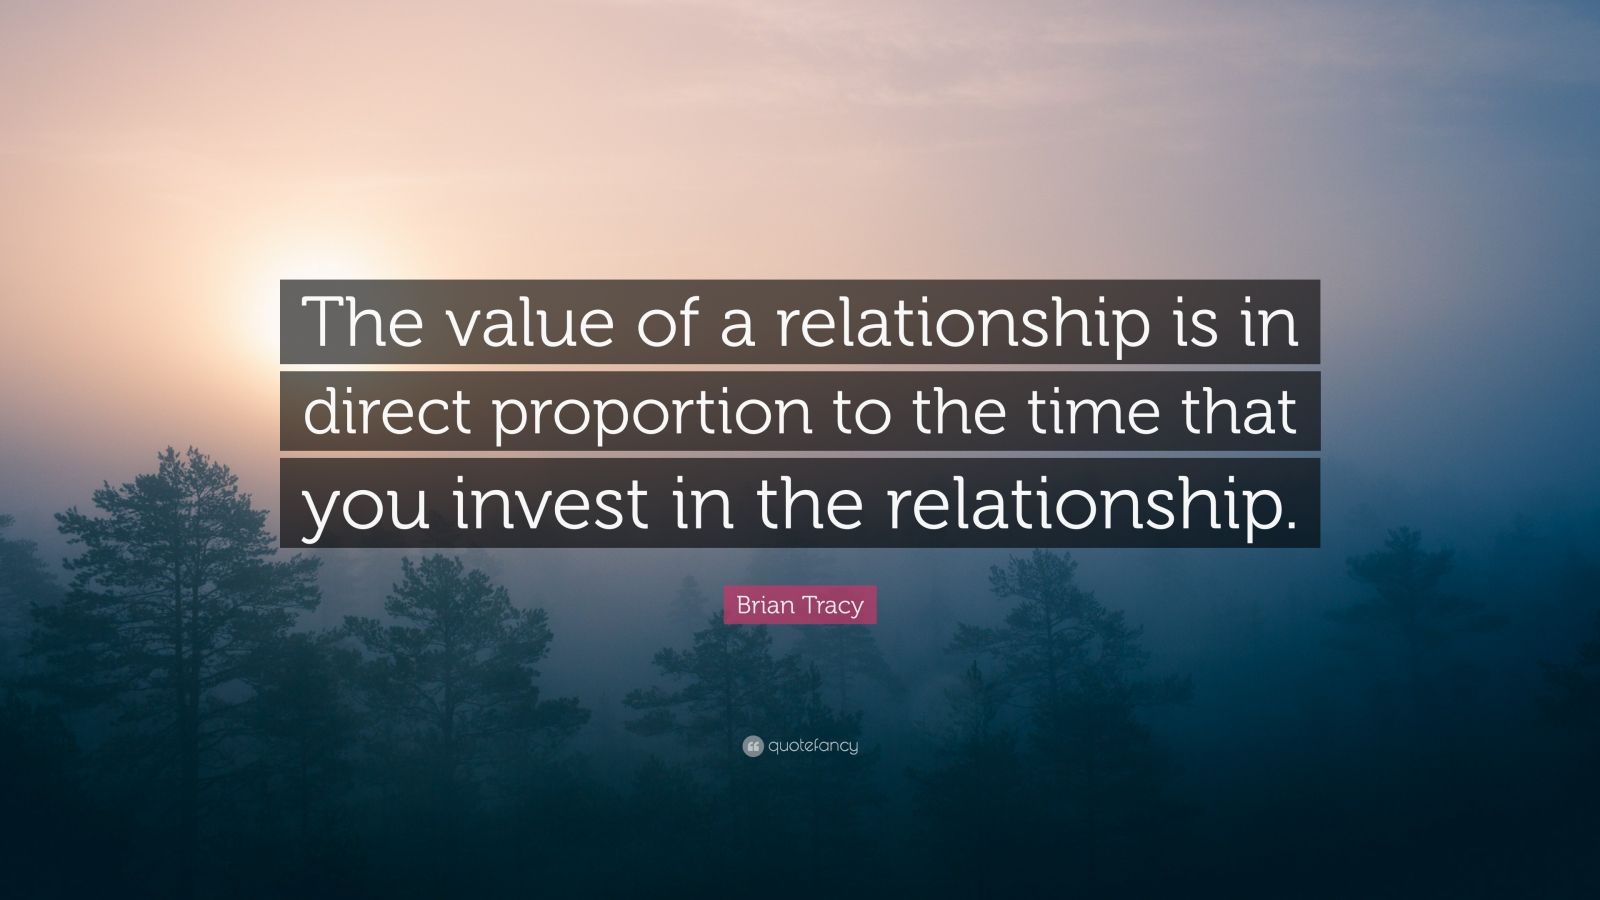 Brian Tracy Quote “The value of a relationship is in